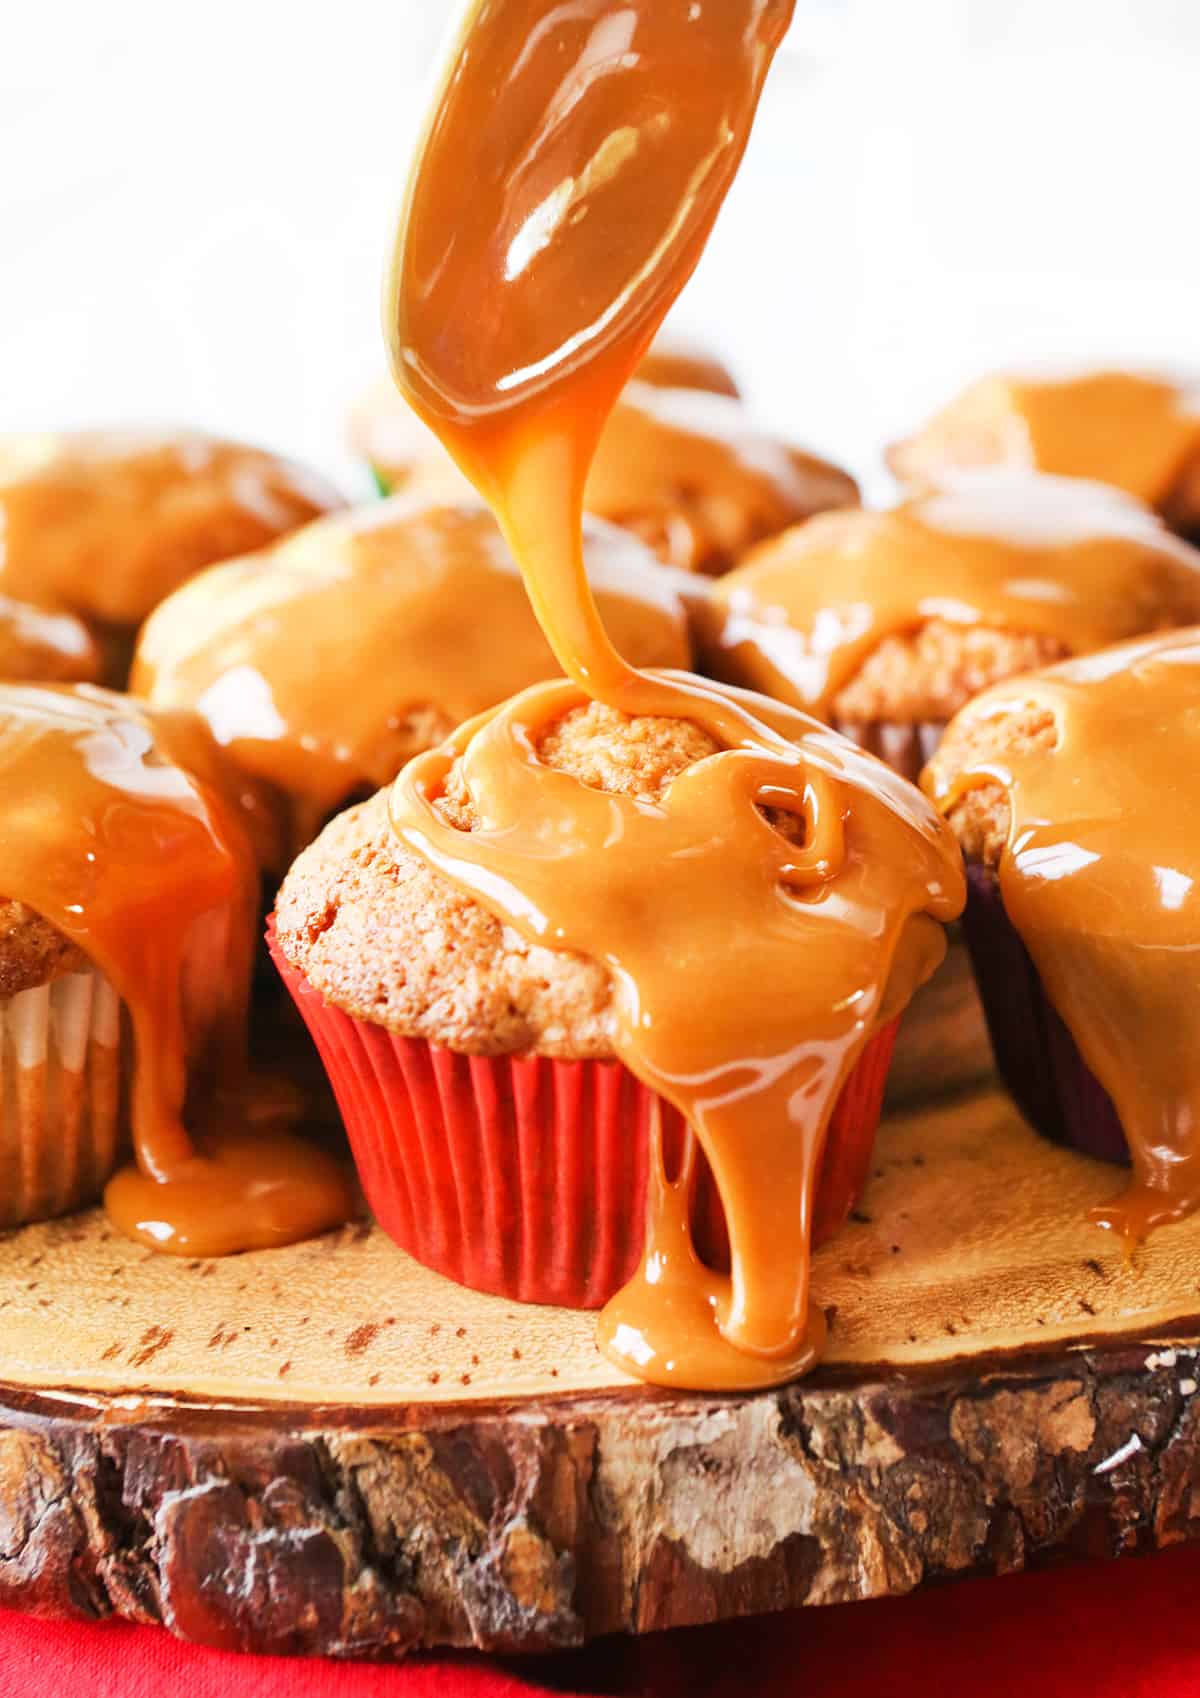 spoon drizzling caramel over cupcakes.